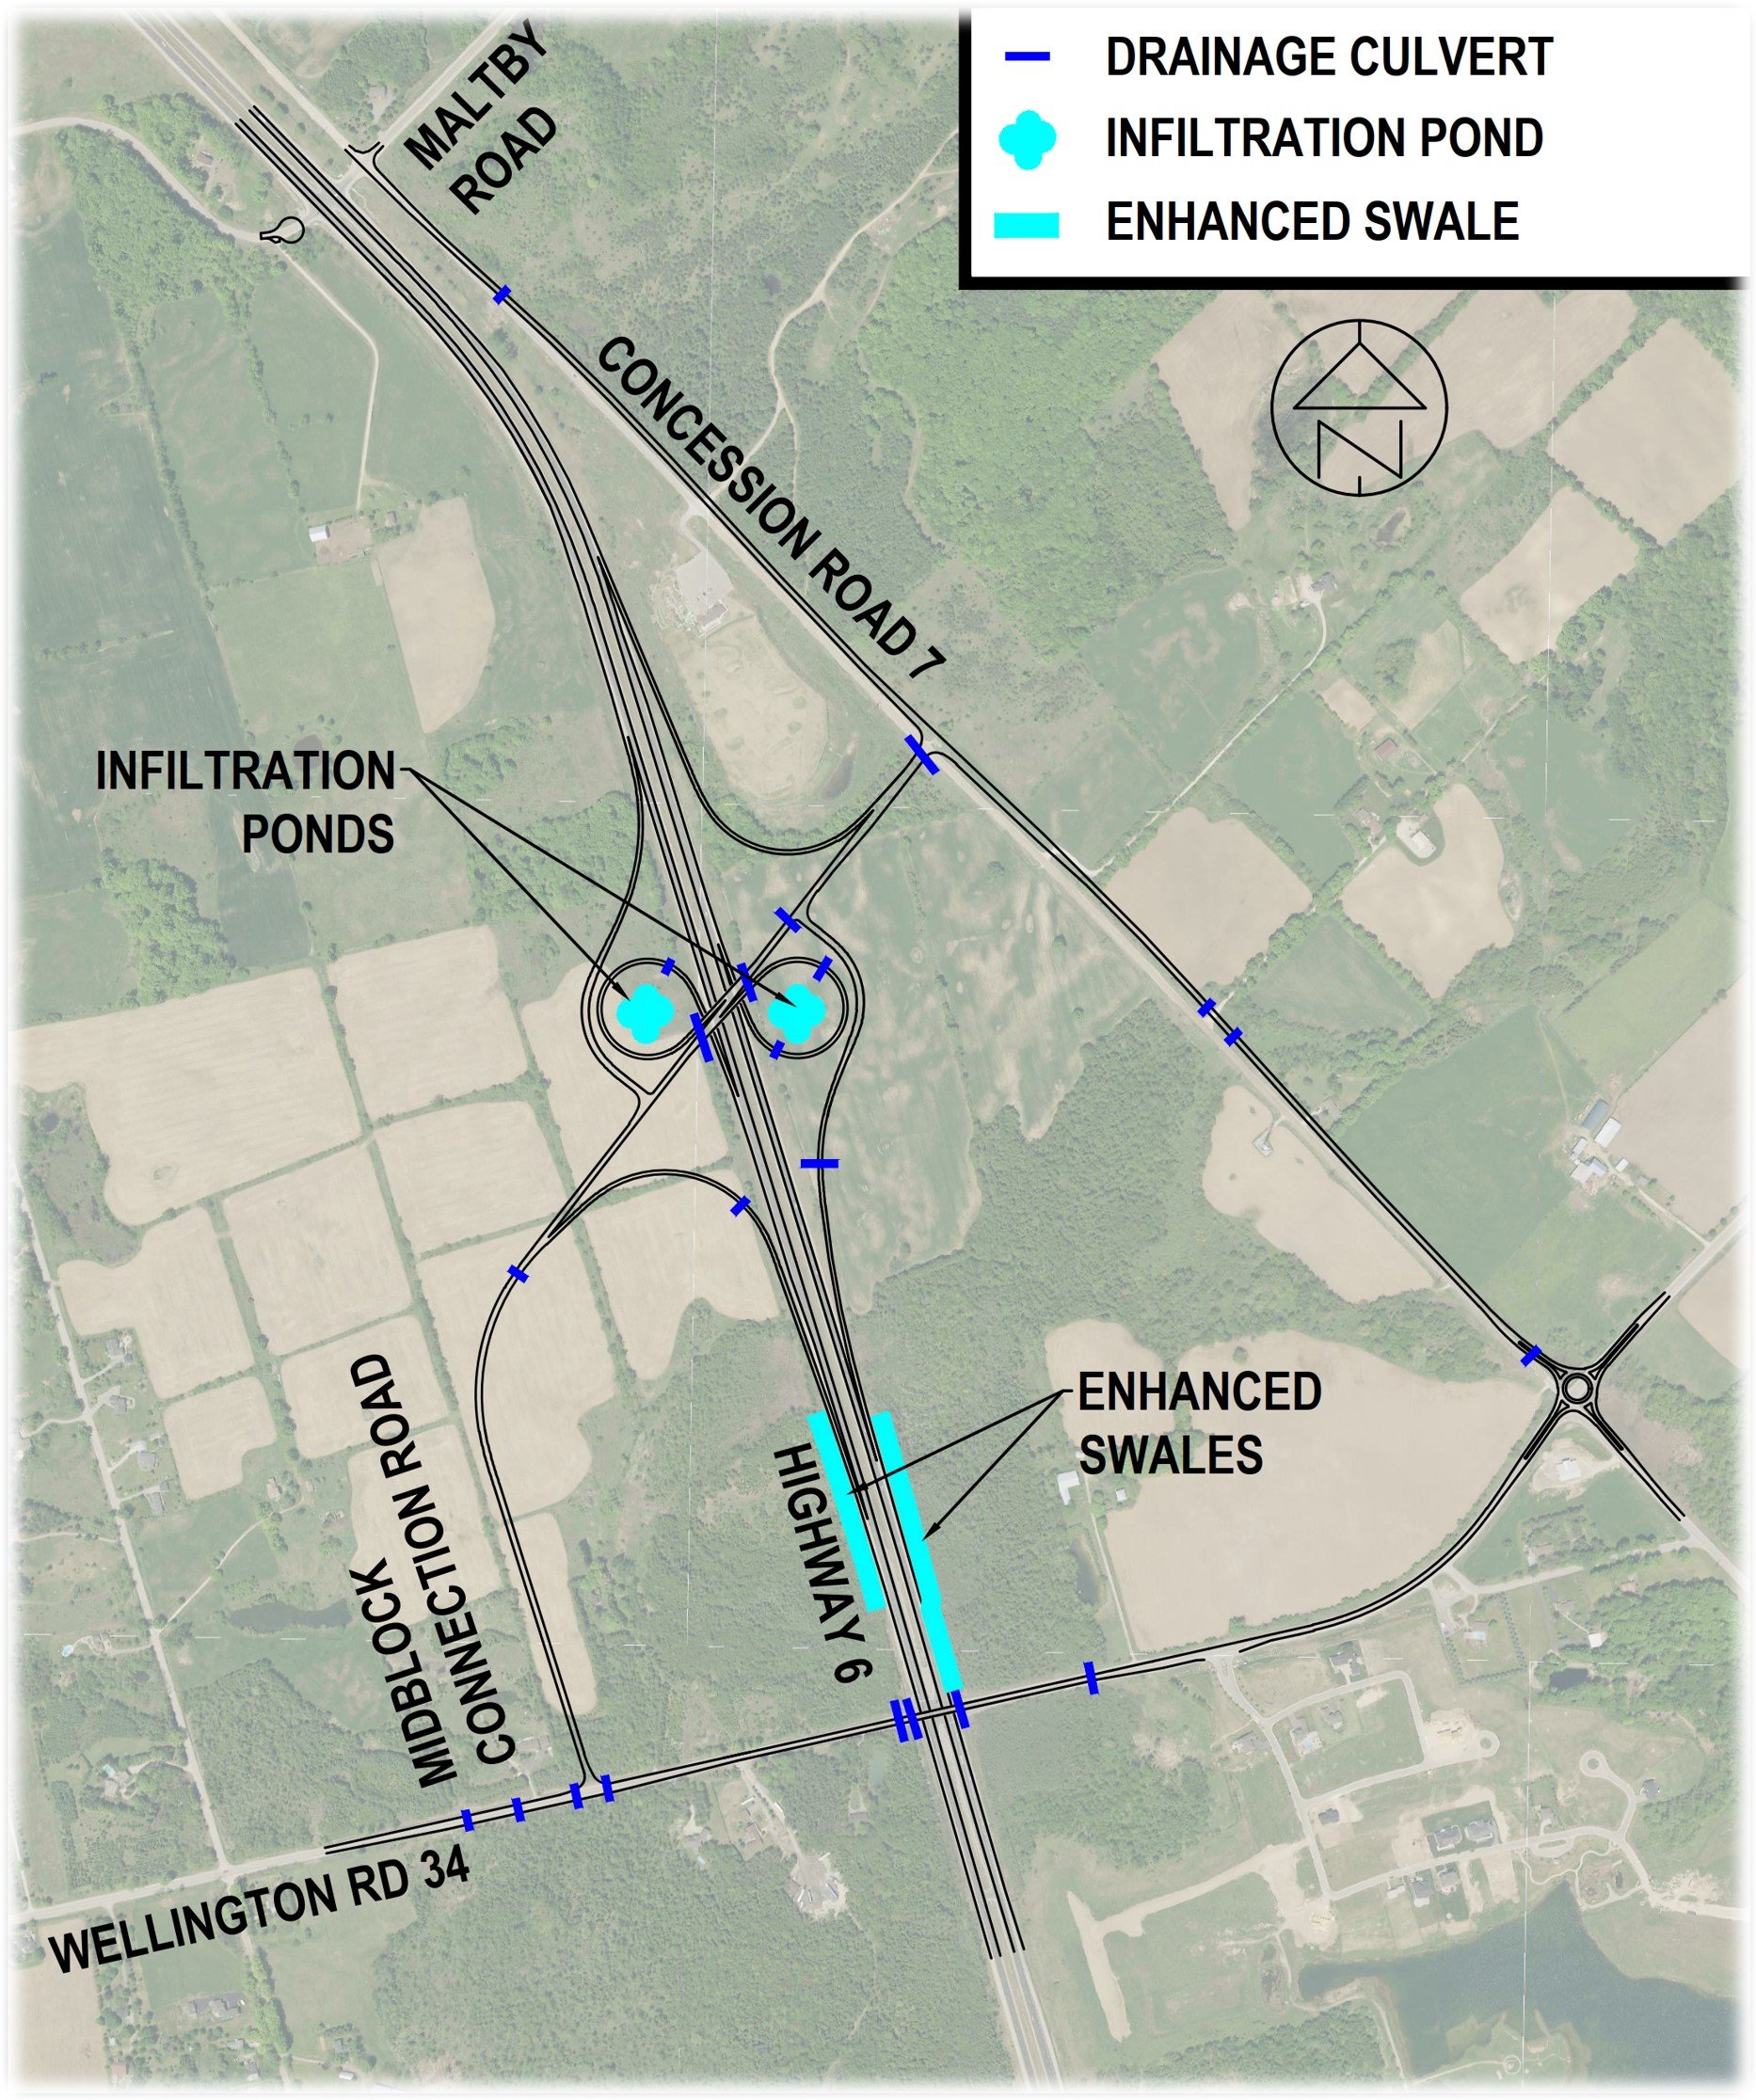 Aerial map depicting the recommended stormwater management features including drainage culverts, infiltration ponds and enhanced swales within the Study Area